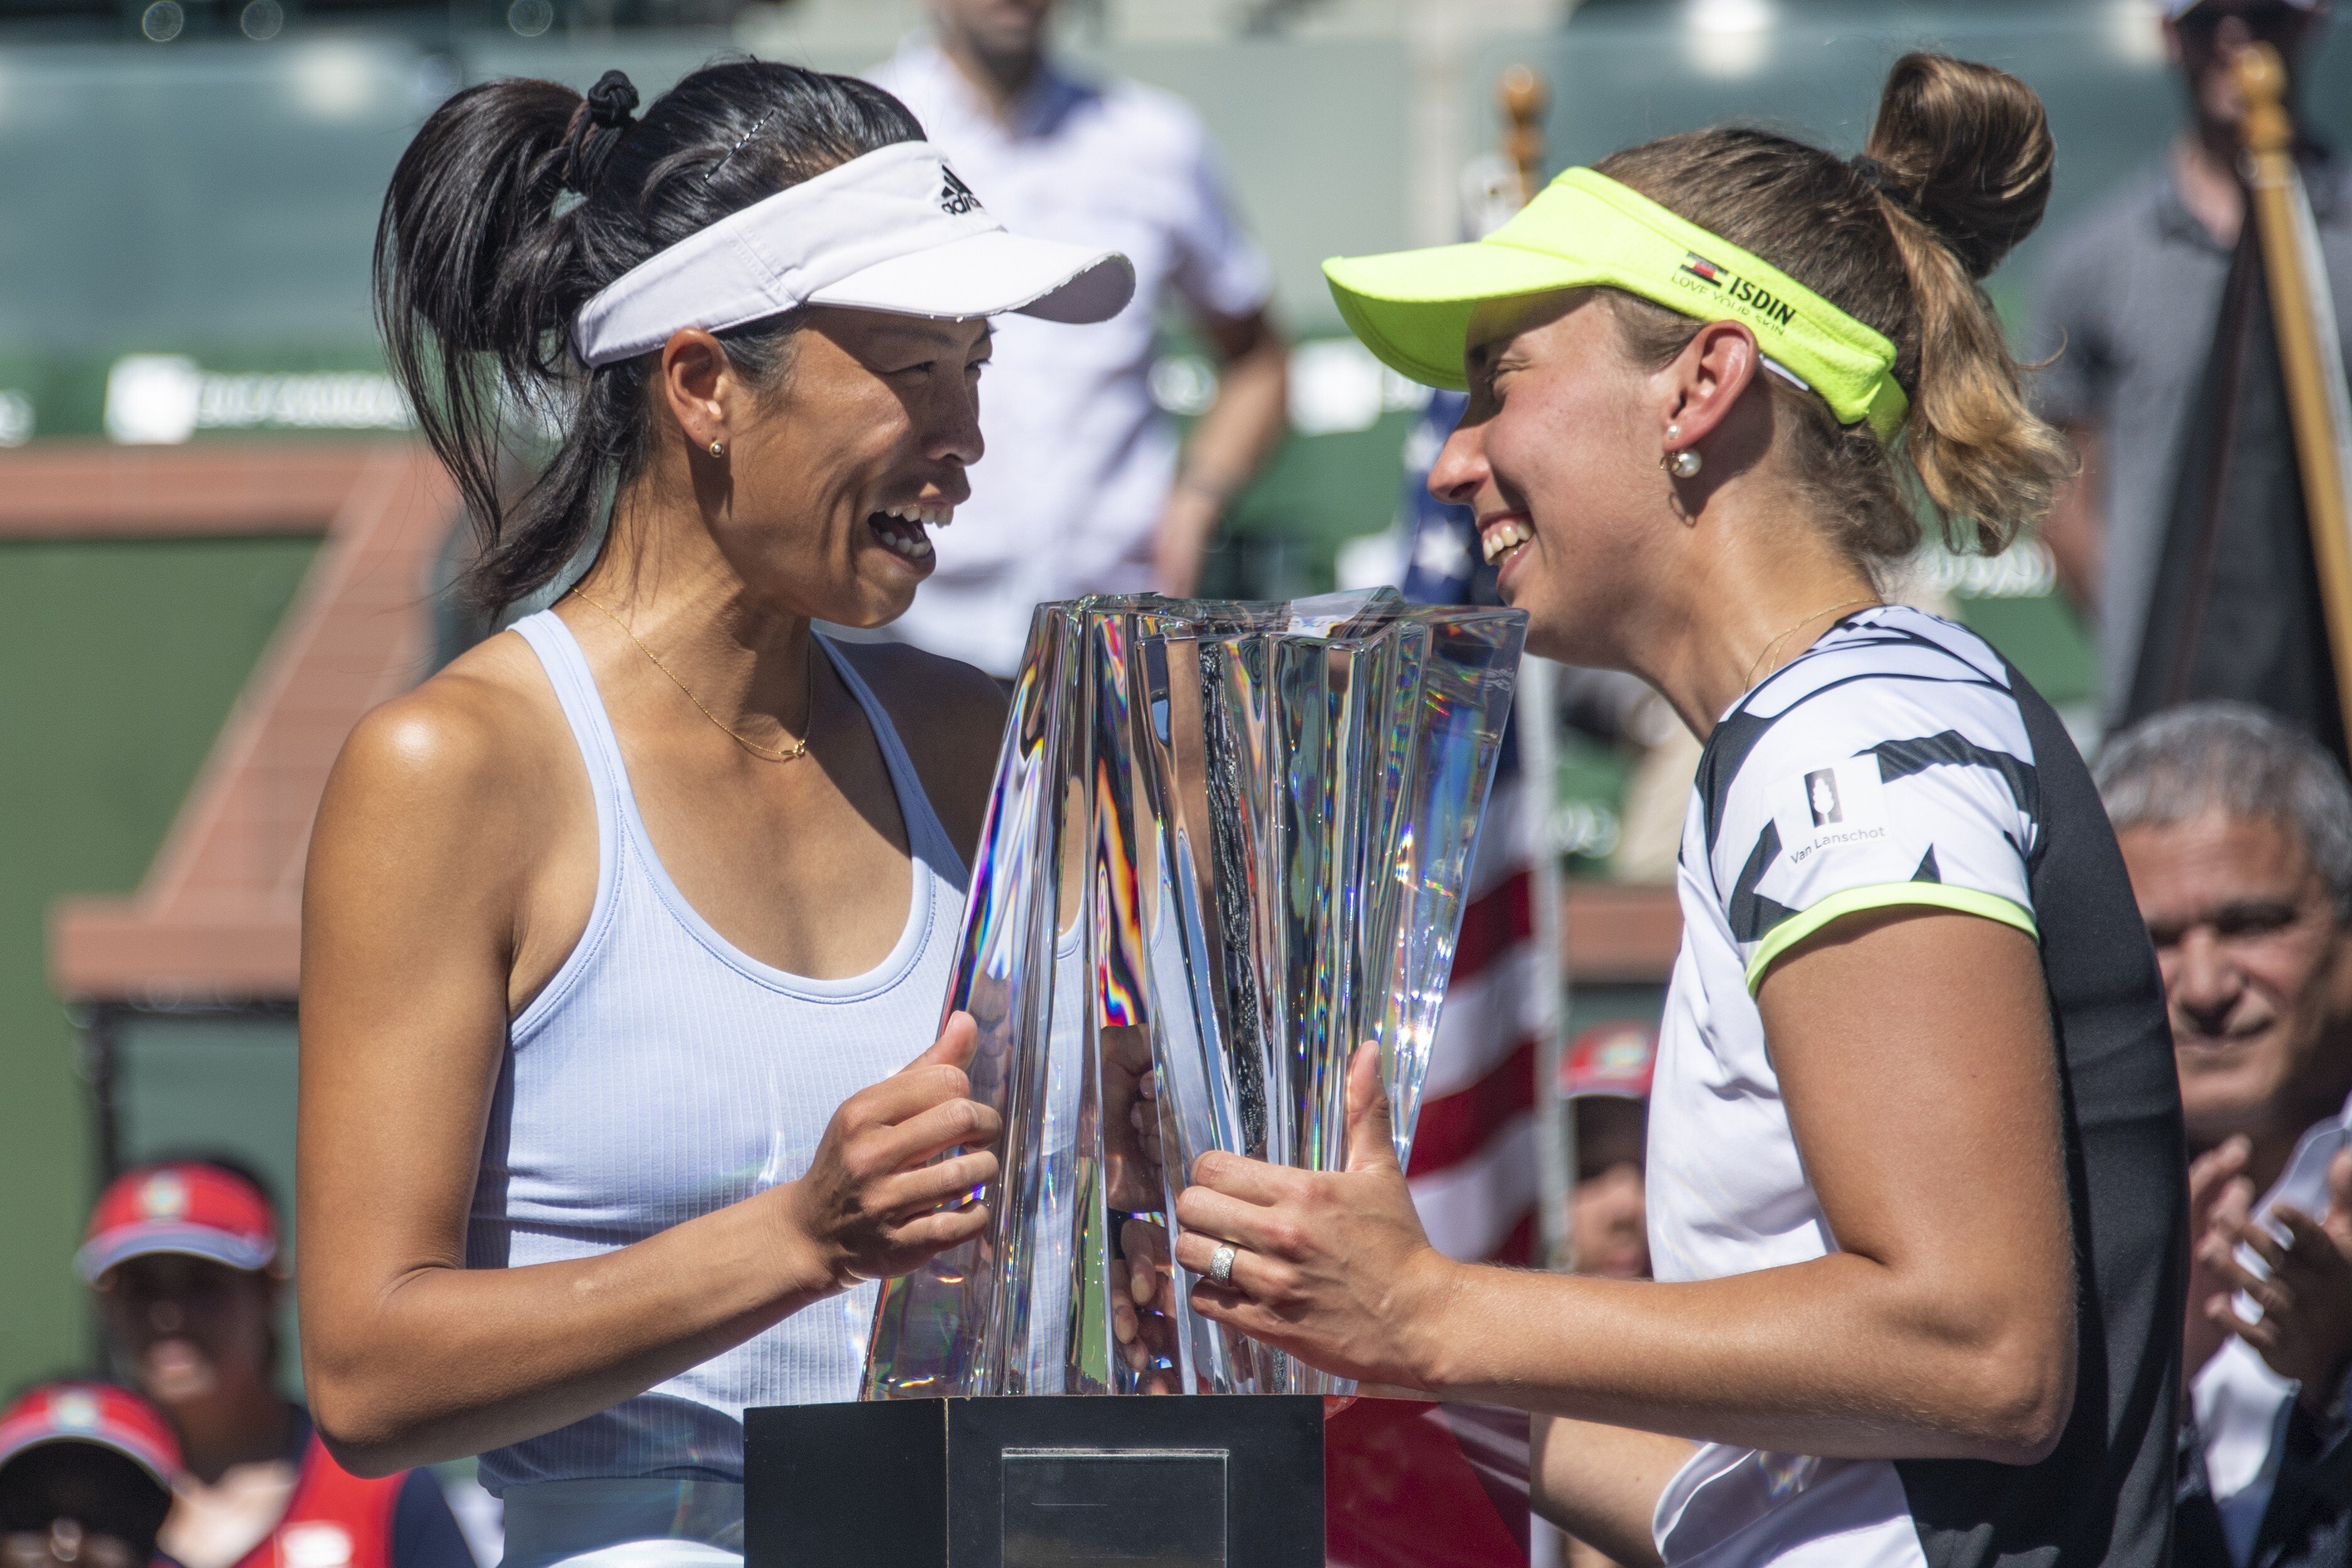 Hsieh Su-wei of Taiwan and Elise Mertens of Belgium lift the Indian Wells trophy after winning the women's doubles final at the 2021 BNP Paribas Open. Photo: AP